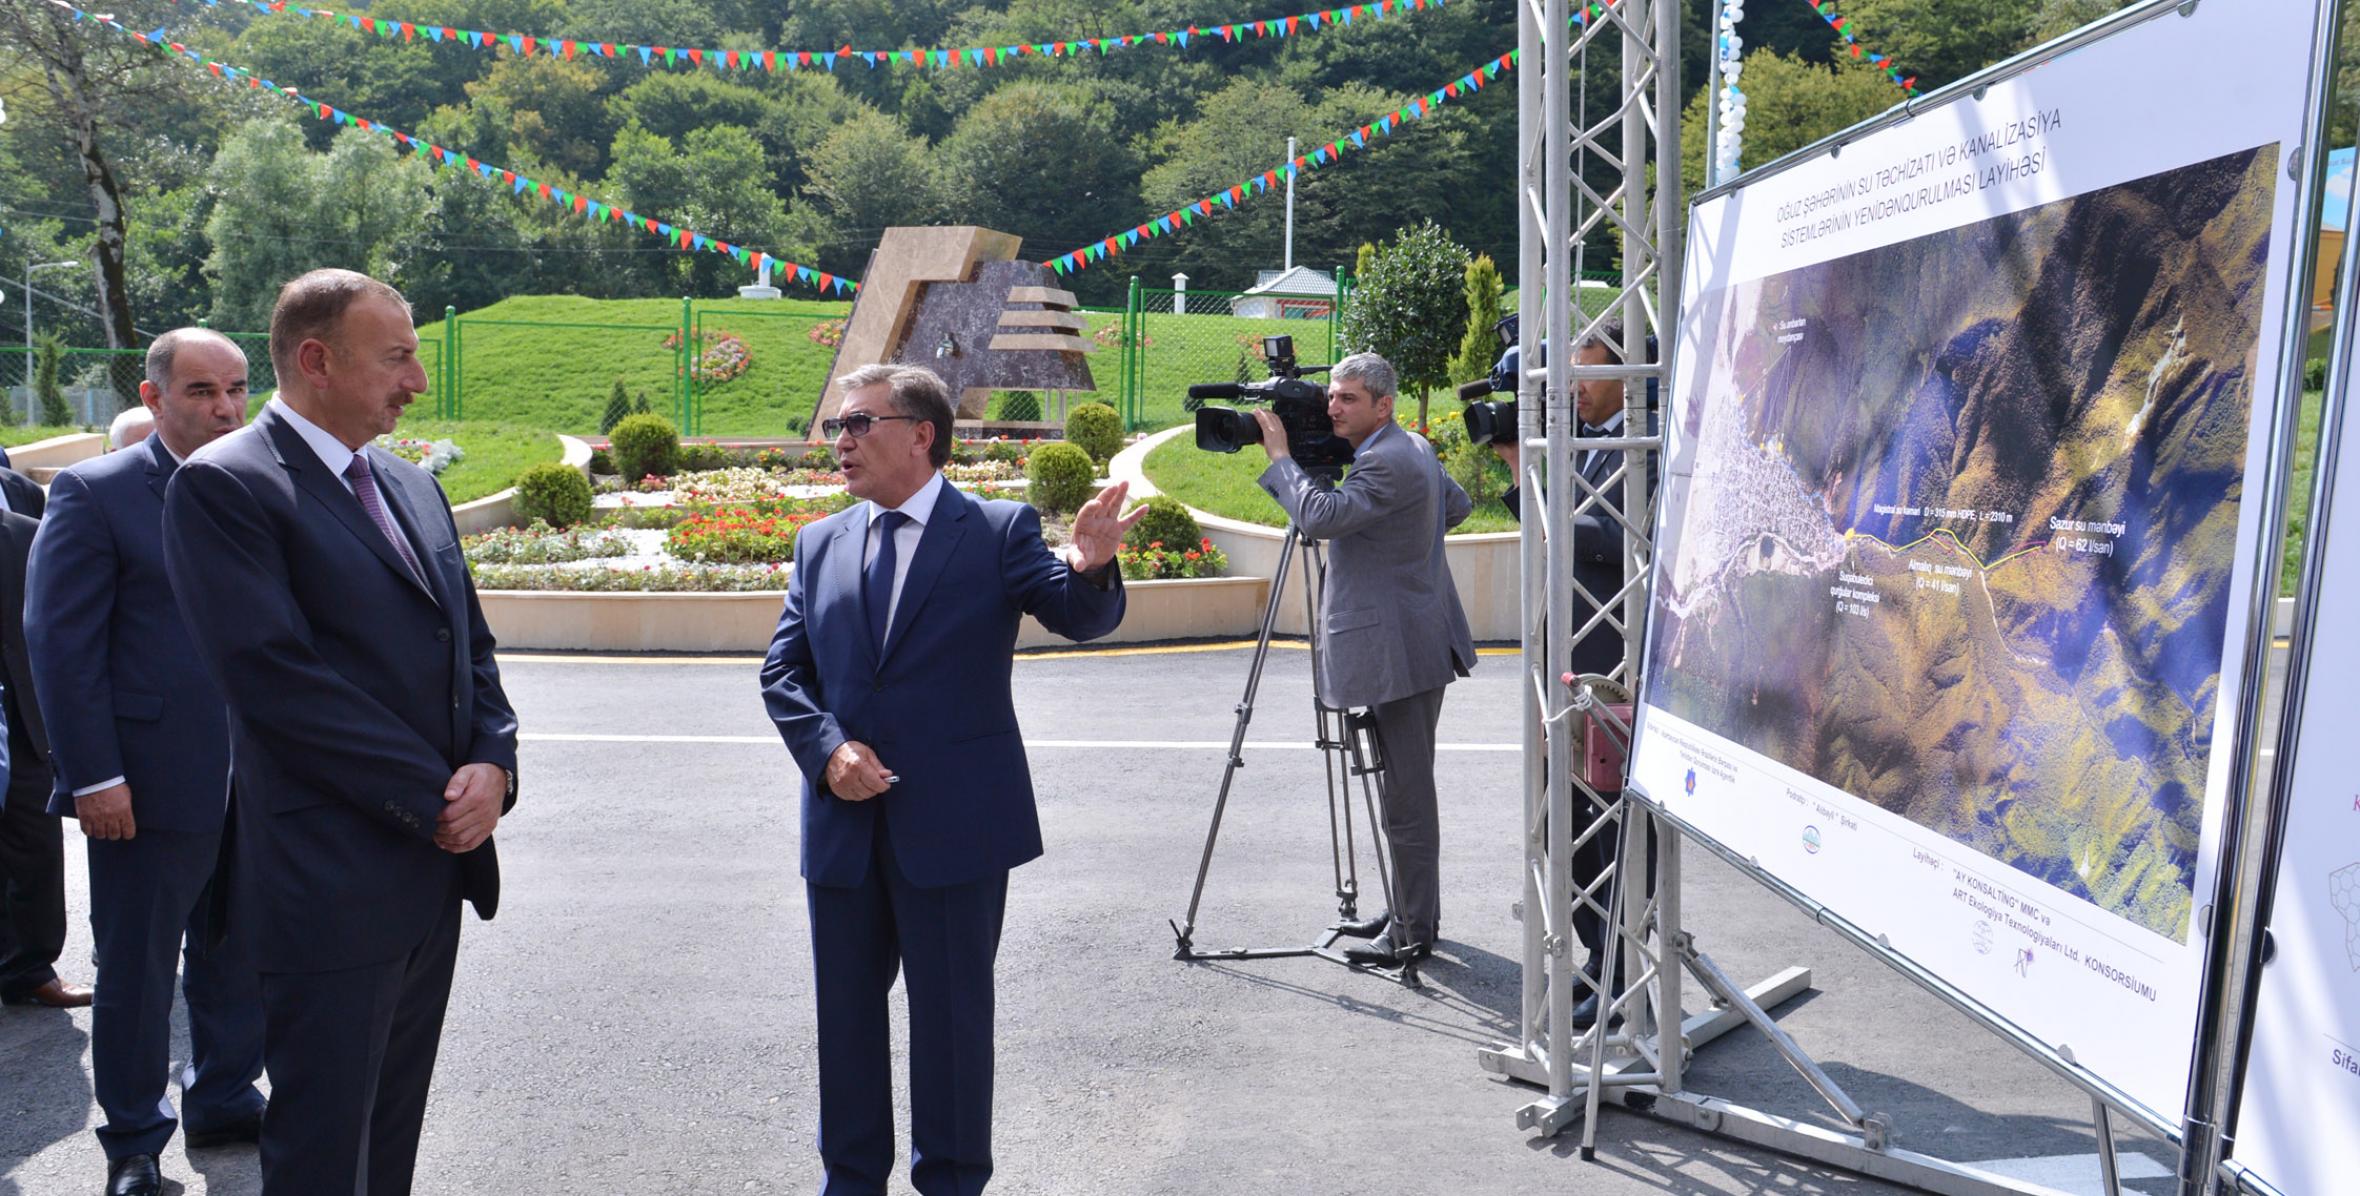 Ilham Aliyev attended a ceremony to supply drinking water to Oguz city